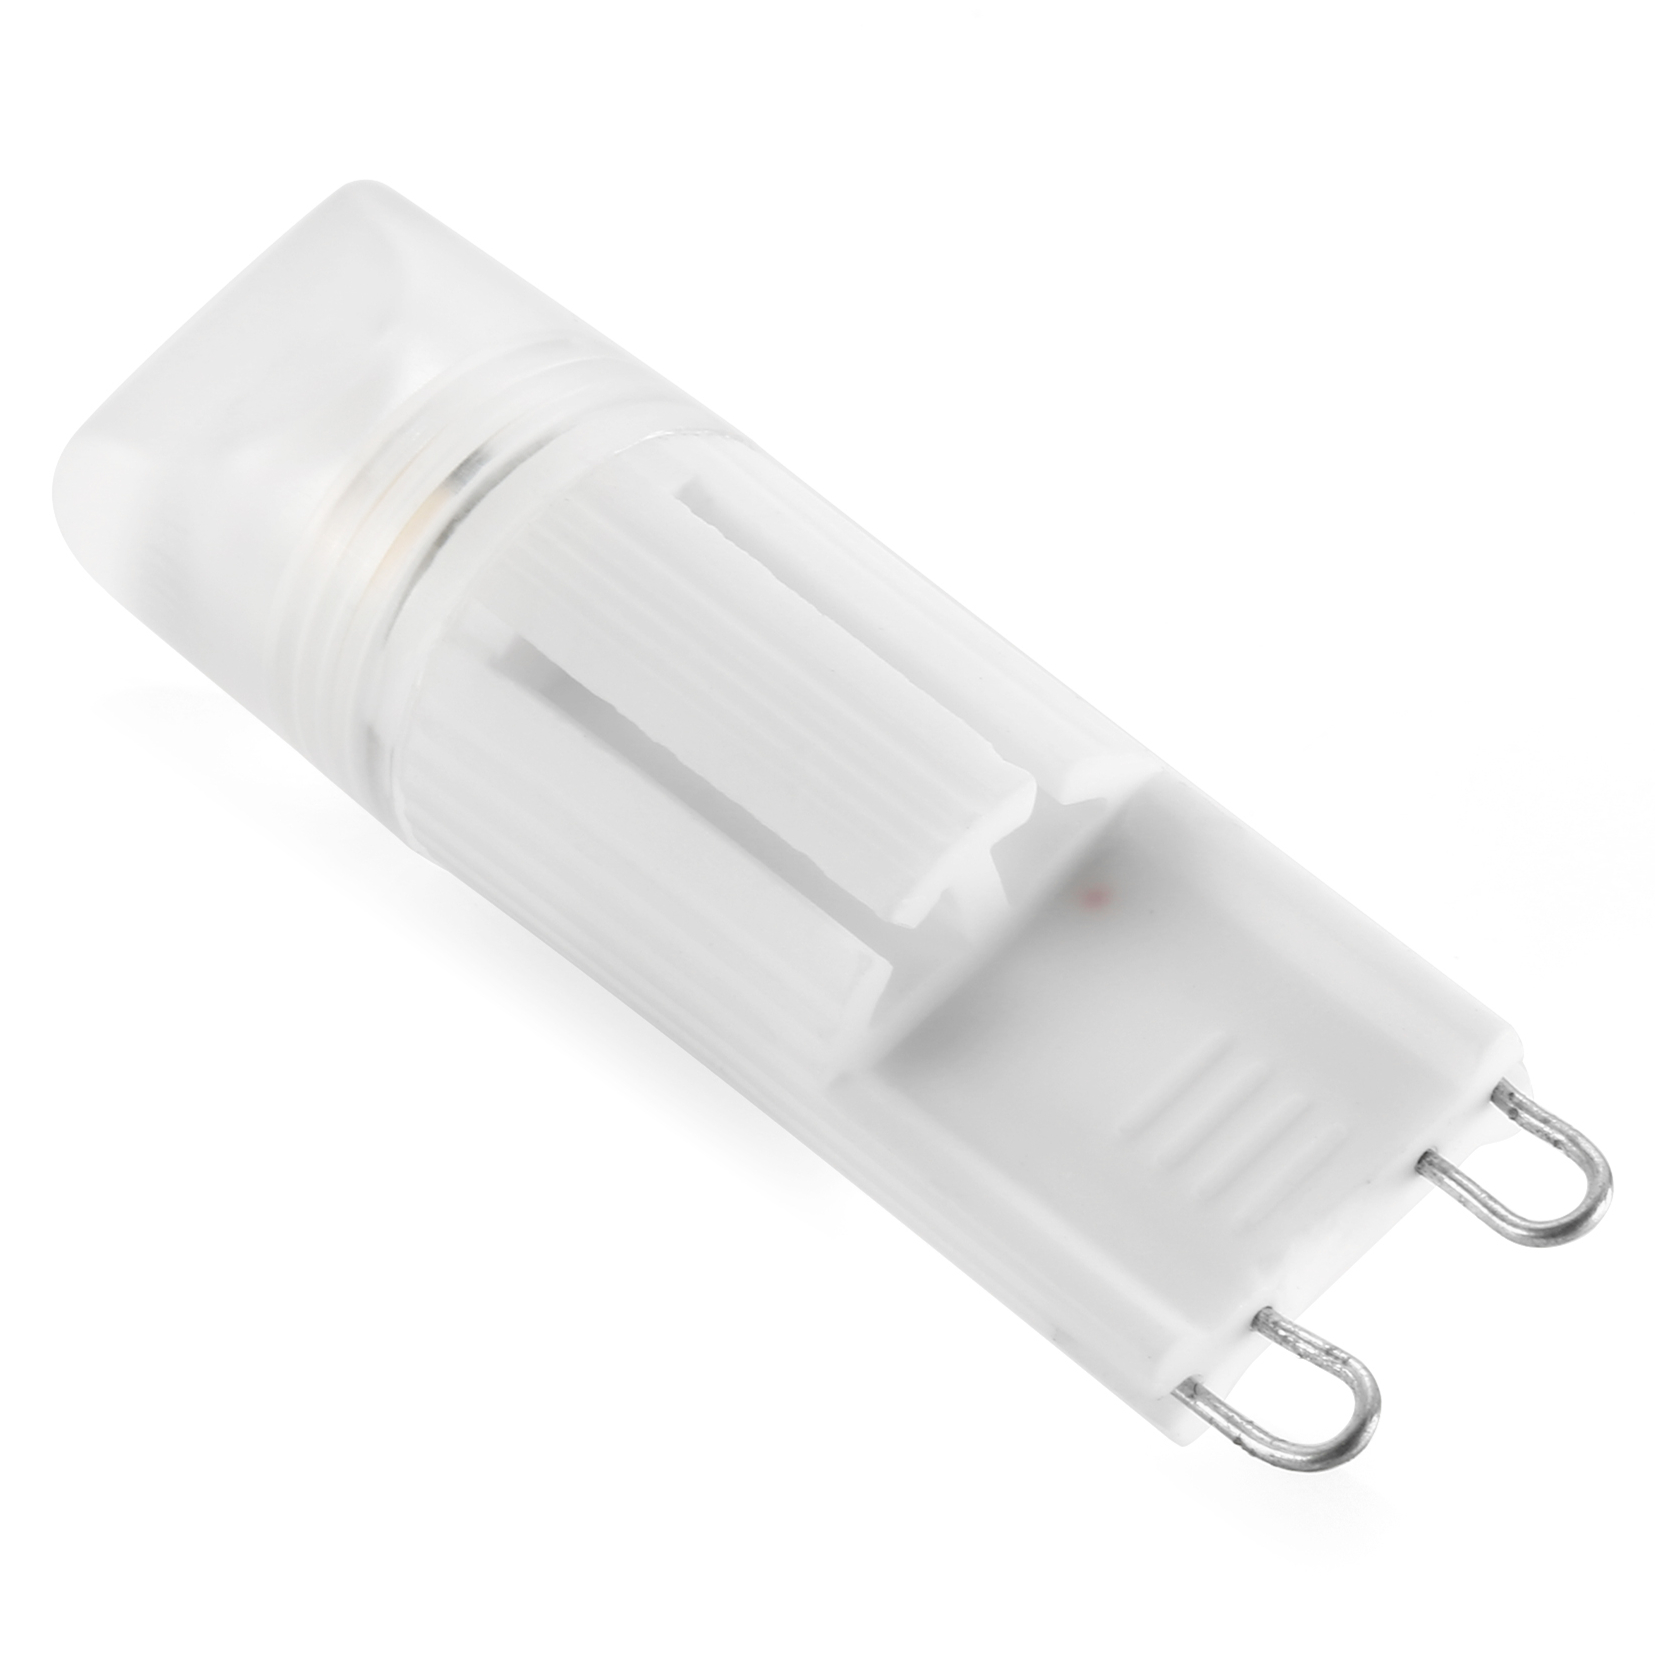 Long life lamp g9 ceramic led replacement for g9 halogen warm white